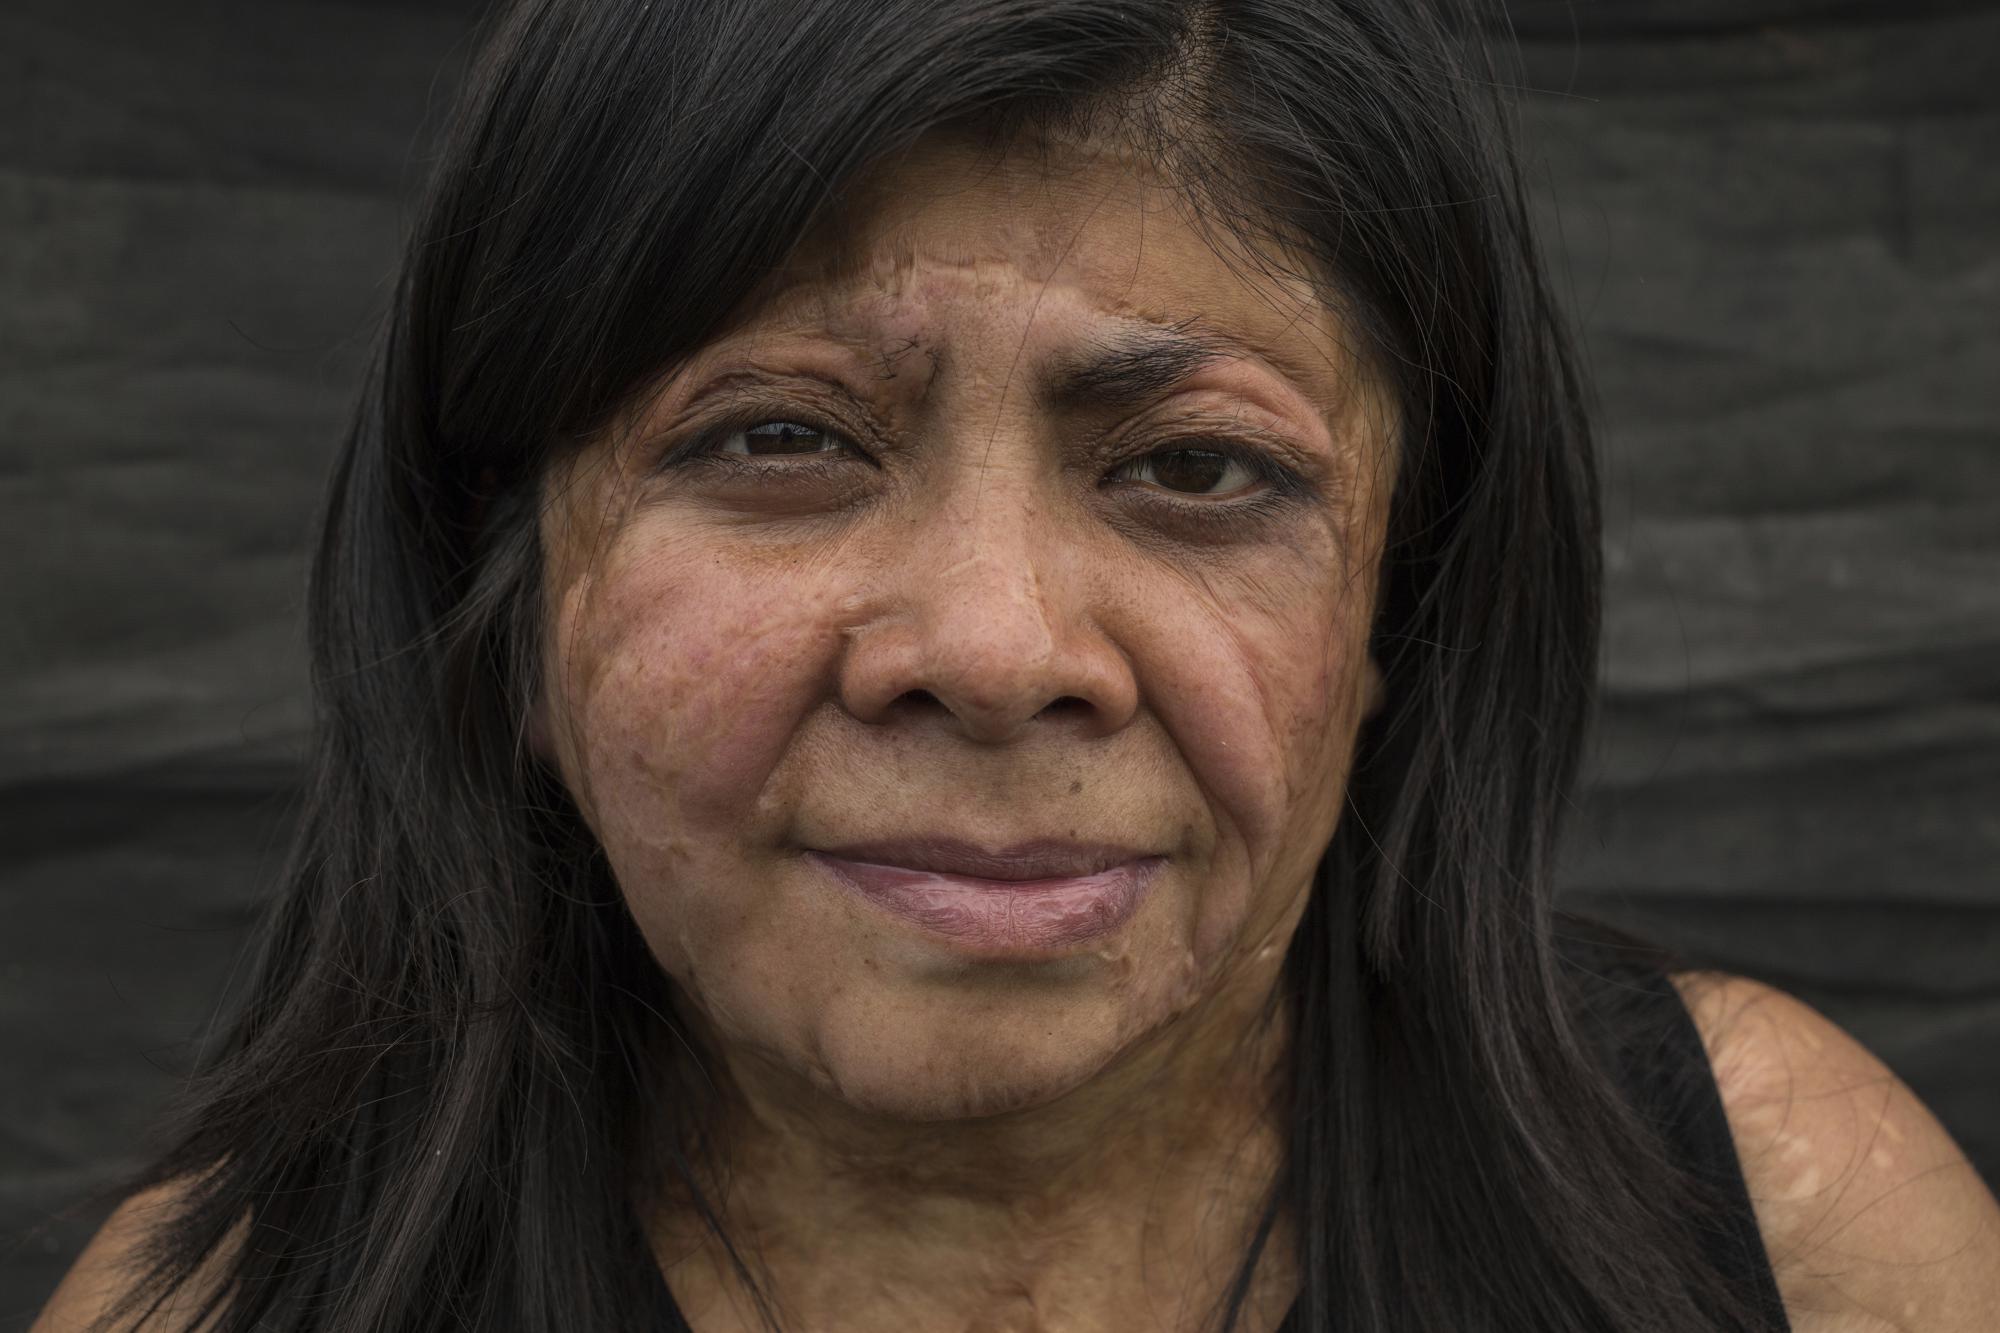 Elisa Xolalpa poses for a portrait during an interview recounting how she survived an acid attack while tied to a post by her ex-partner, damaging her face, chest, back, arms, hands, and making her lose her right finger, as she works at her greenhouse where grows plants to sell at a market in Mexico City, Saturday, June 12, 2021. The attack was 20 years ago when she was age 18, but he was arrested for the first time this year, facing a charge of domestic violence. (AP Photo/Ginnette Riquelme)